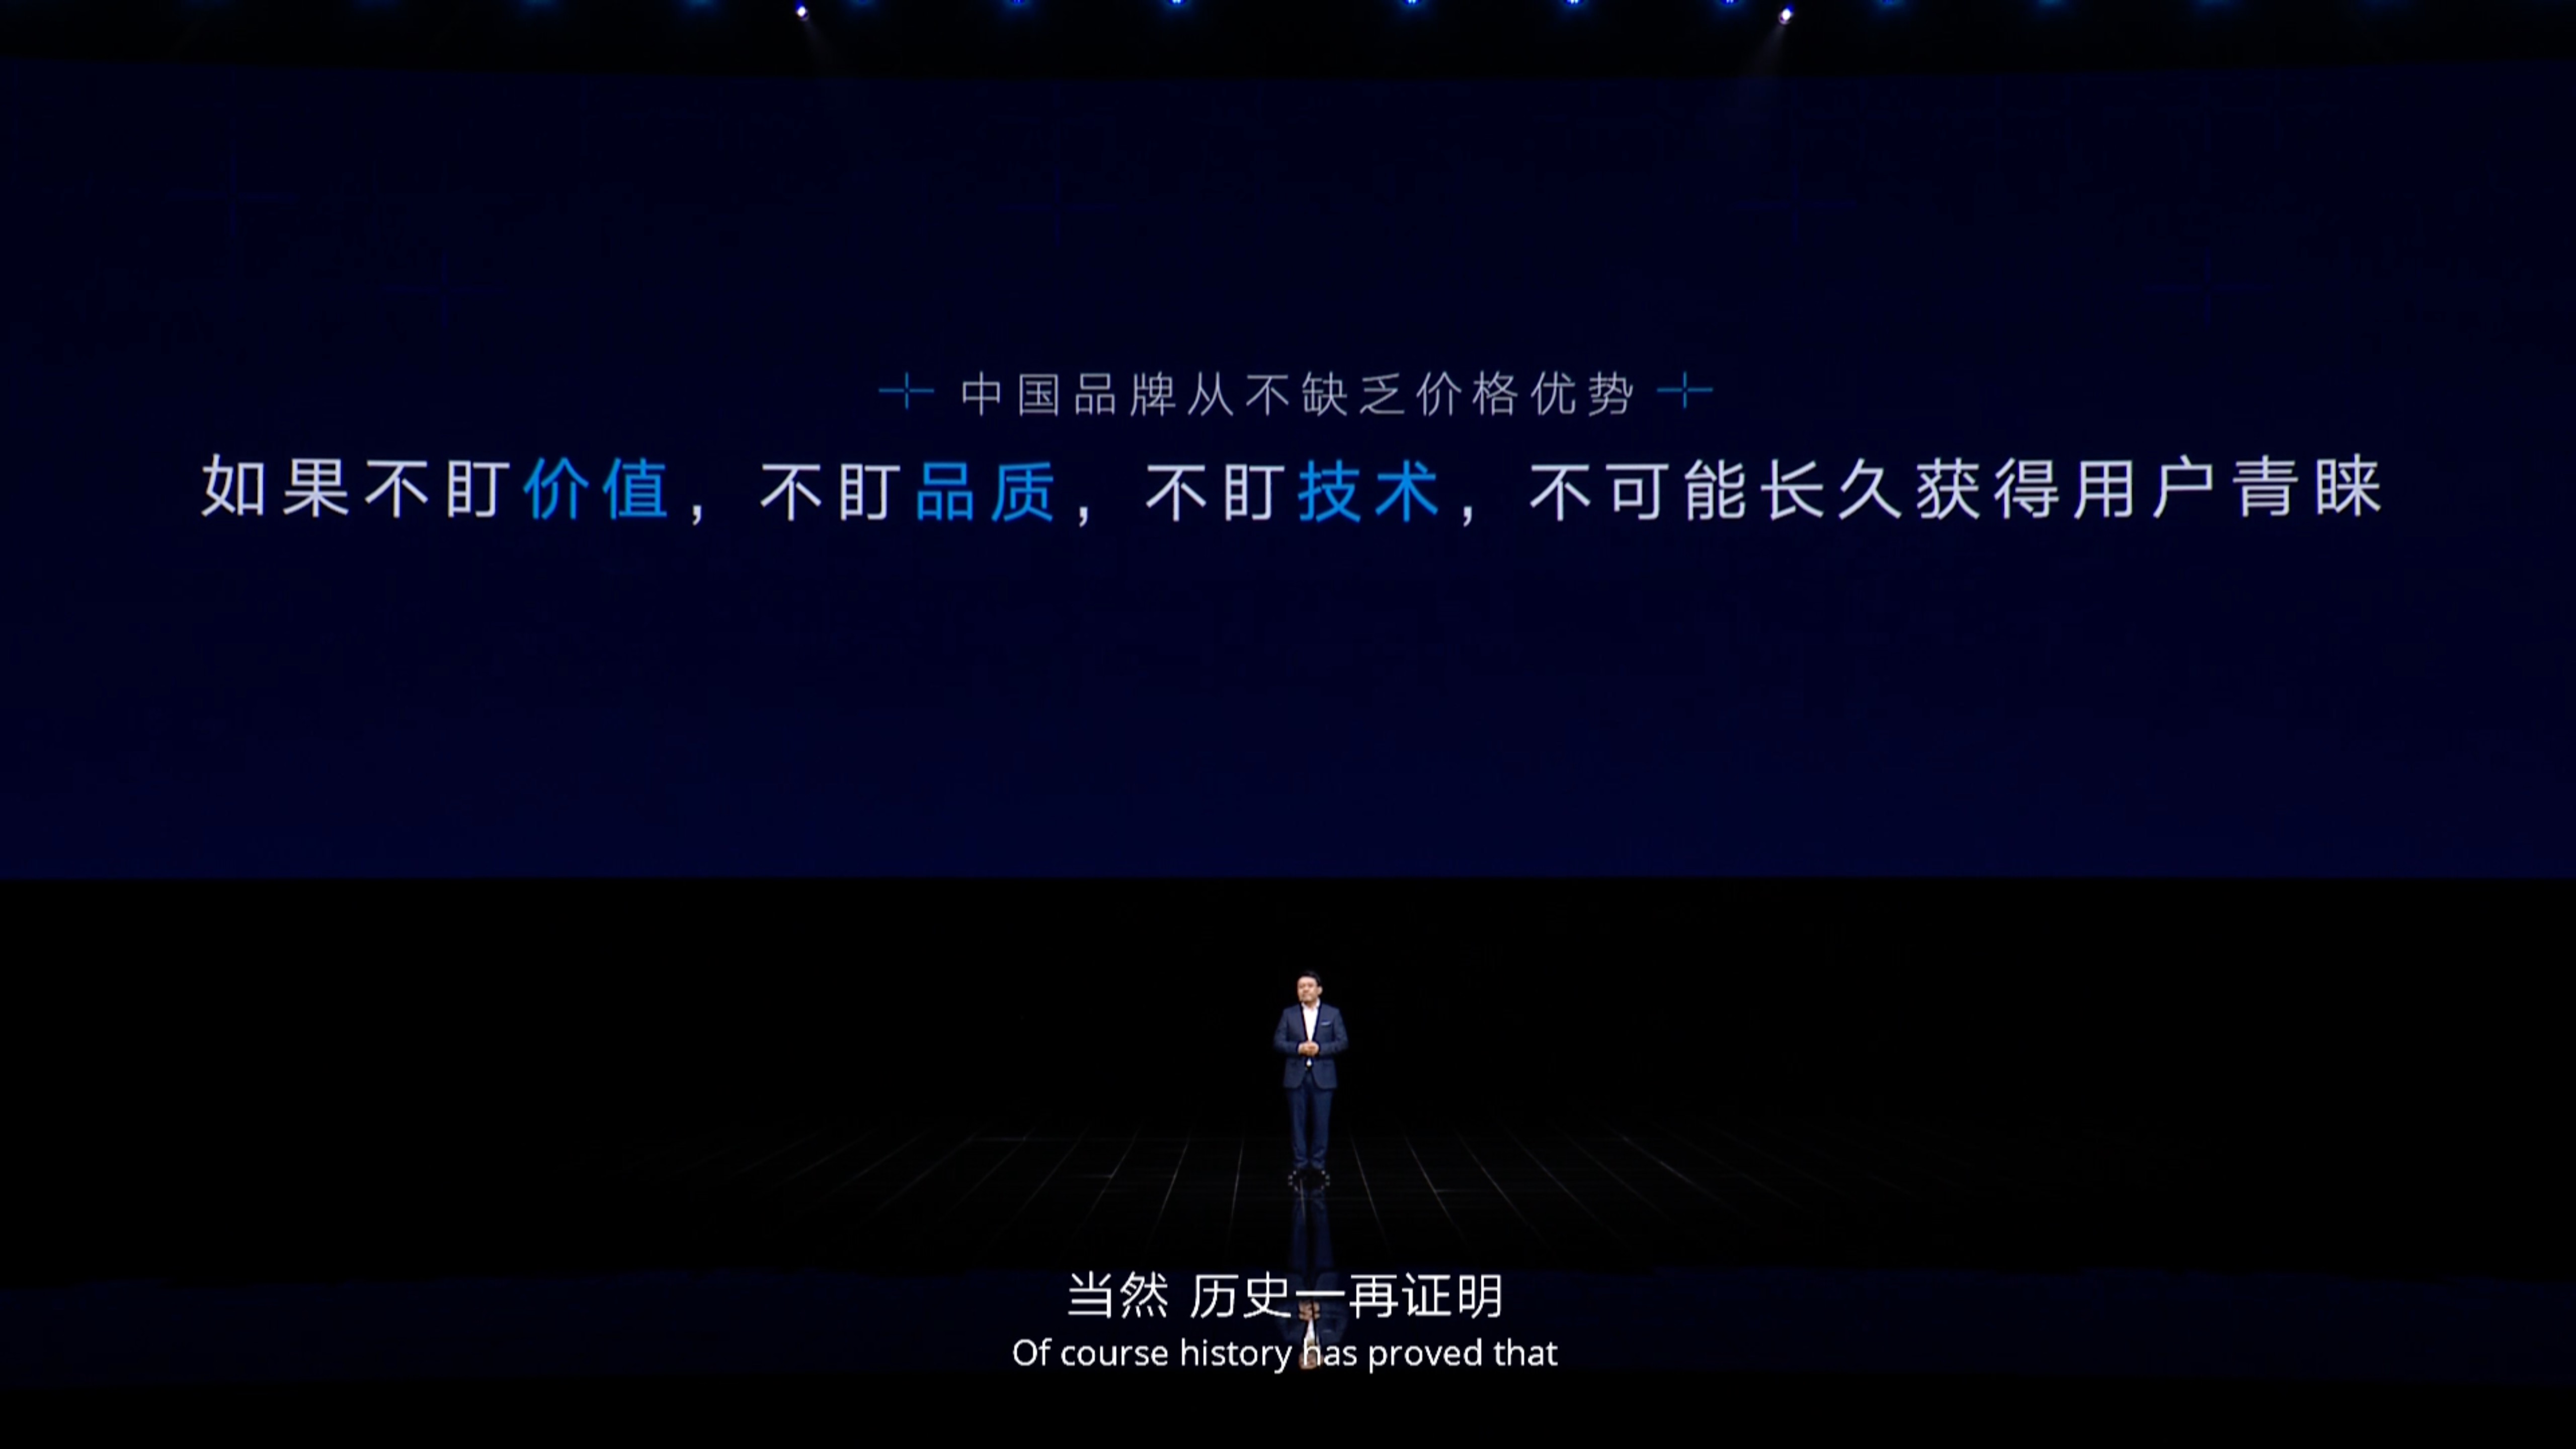 Geely CEO Li Shufu at the Press Conference